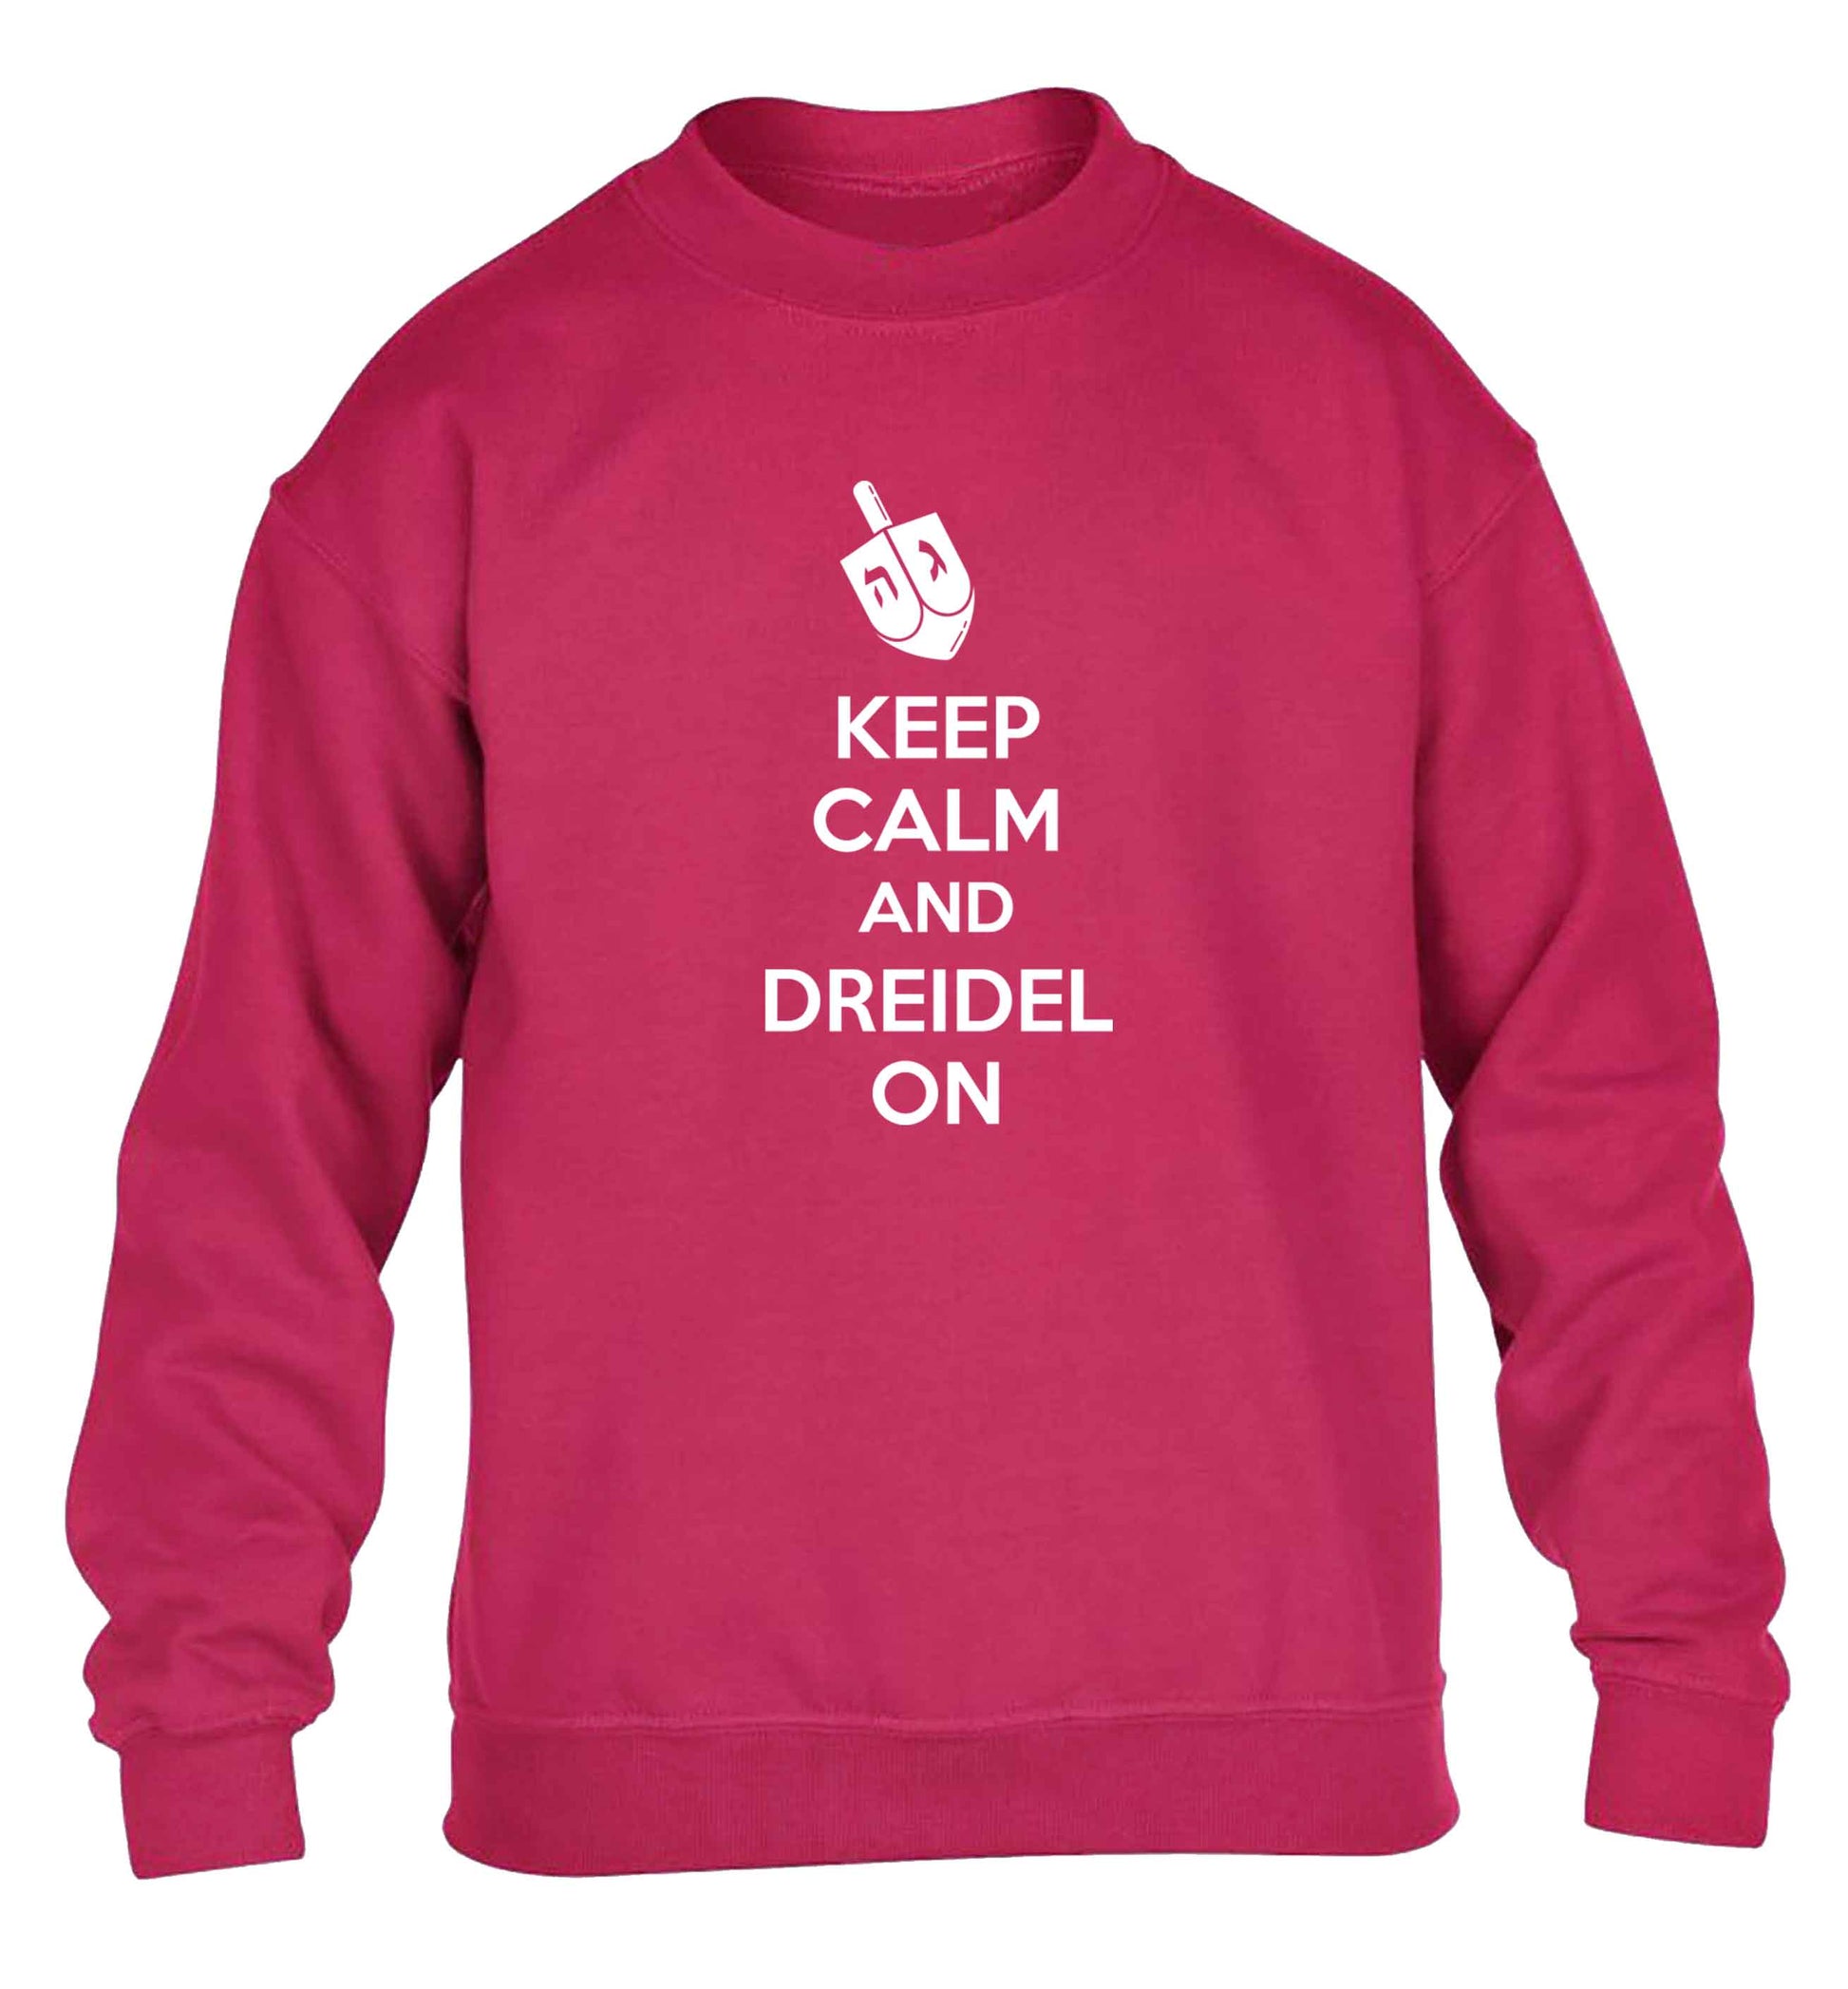 Keep calm and dreidel on children's pink sweater 12-13 Years